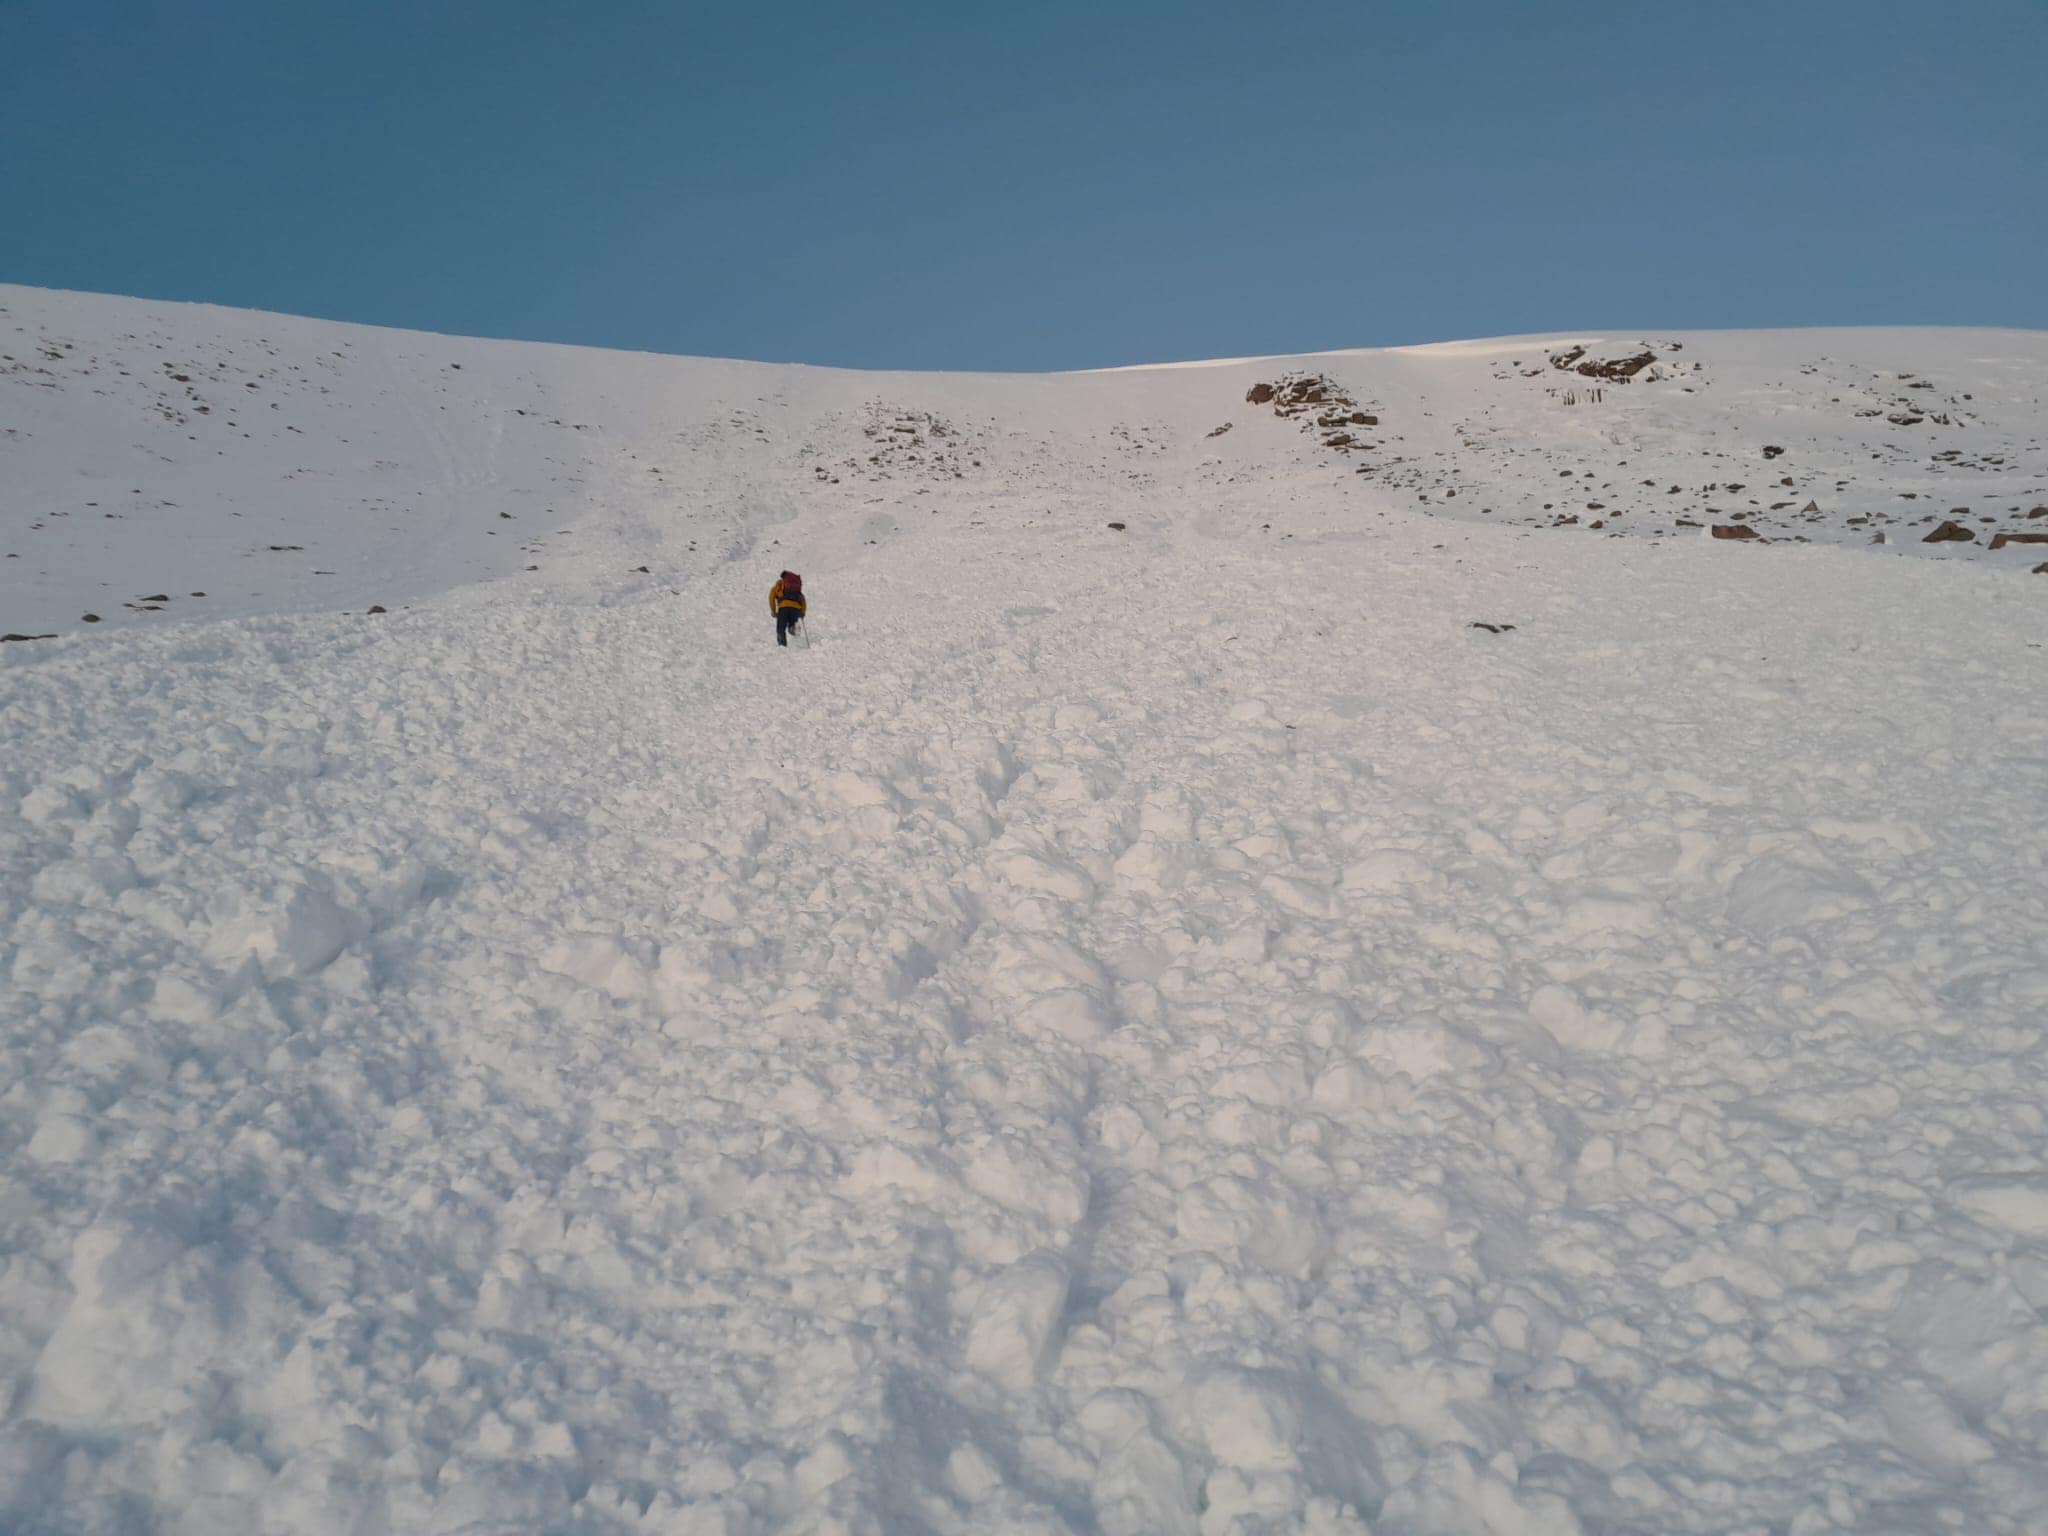 Avalanche debris was searched by the mountain rescue on Tuesday.